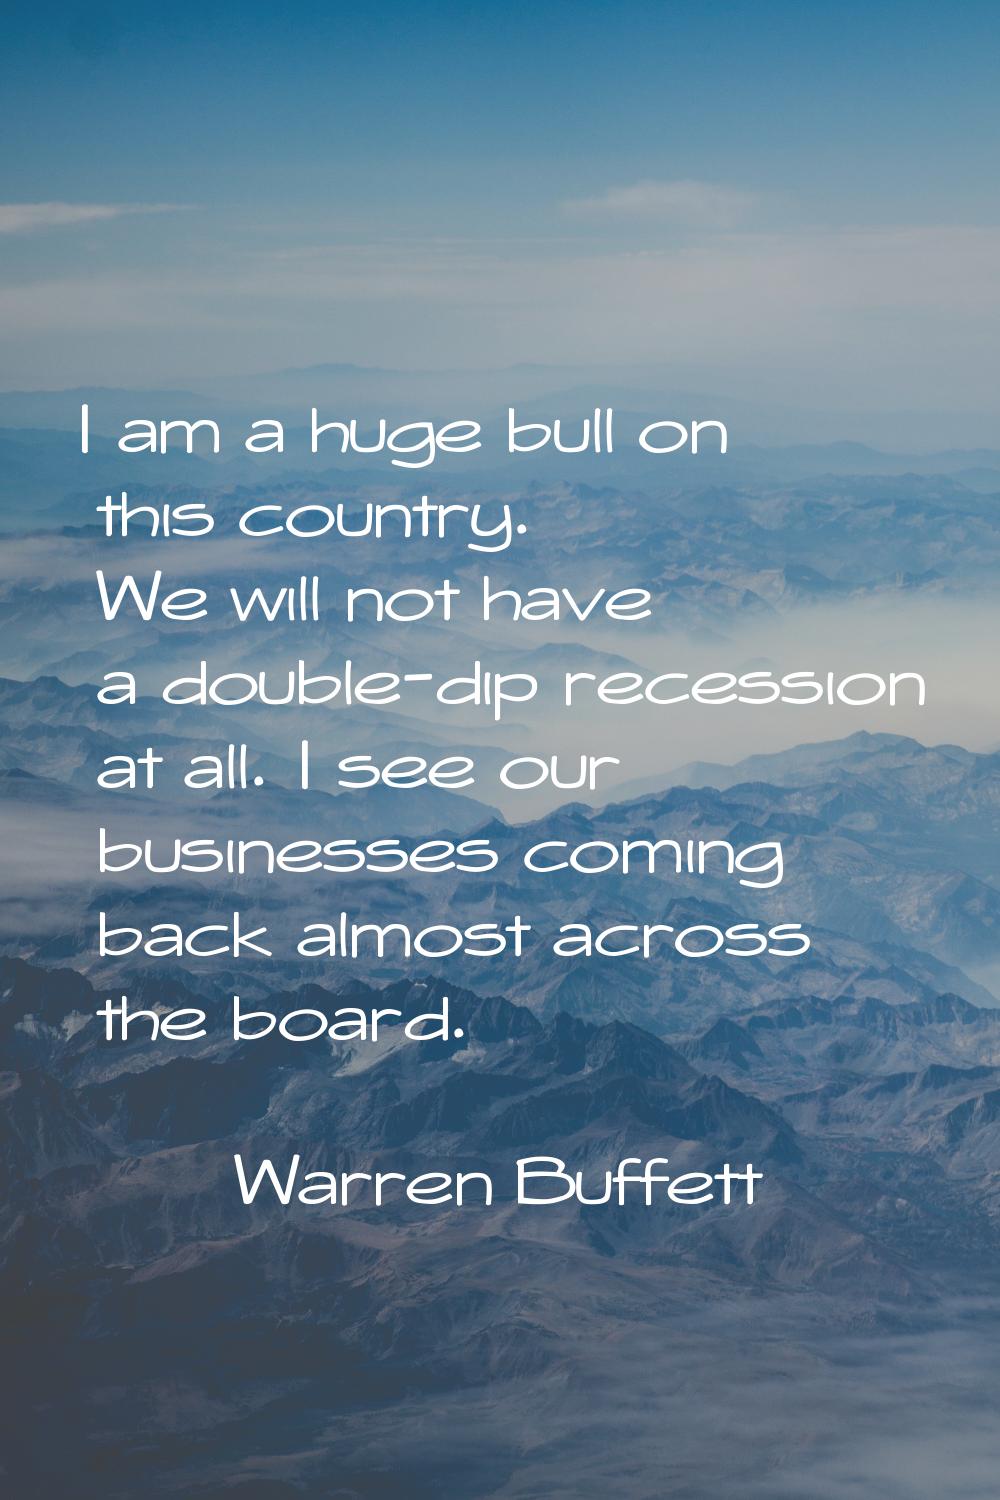 I am a huge bull on this country. We will not have a double-dip recession at all. I see our busines